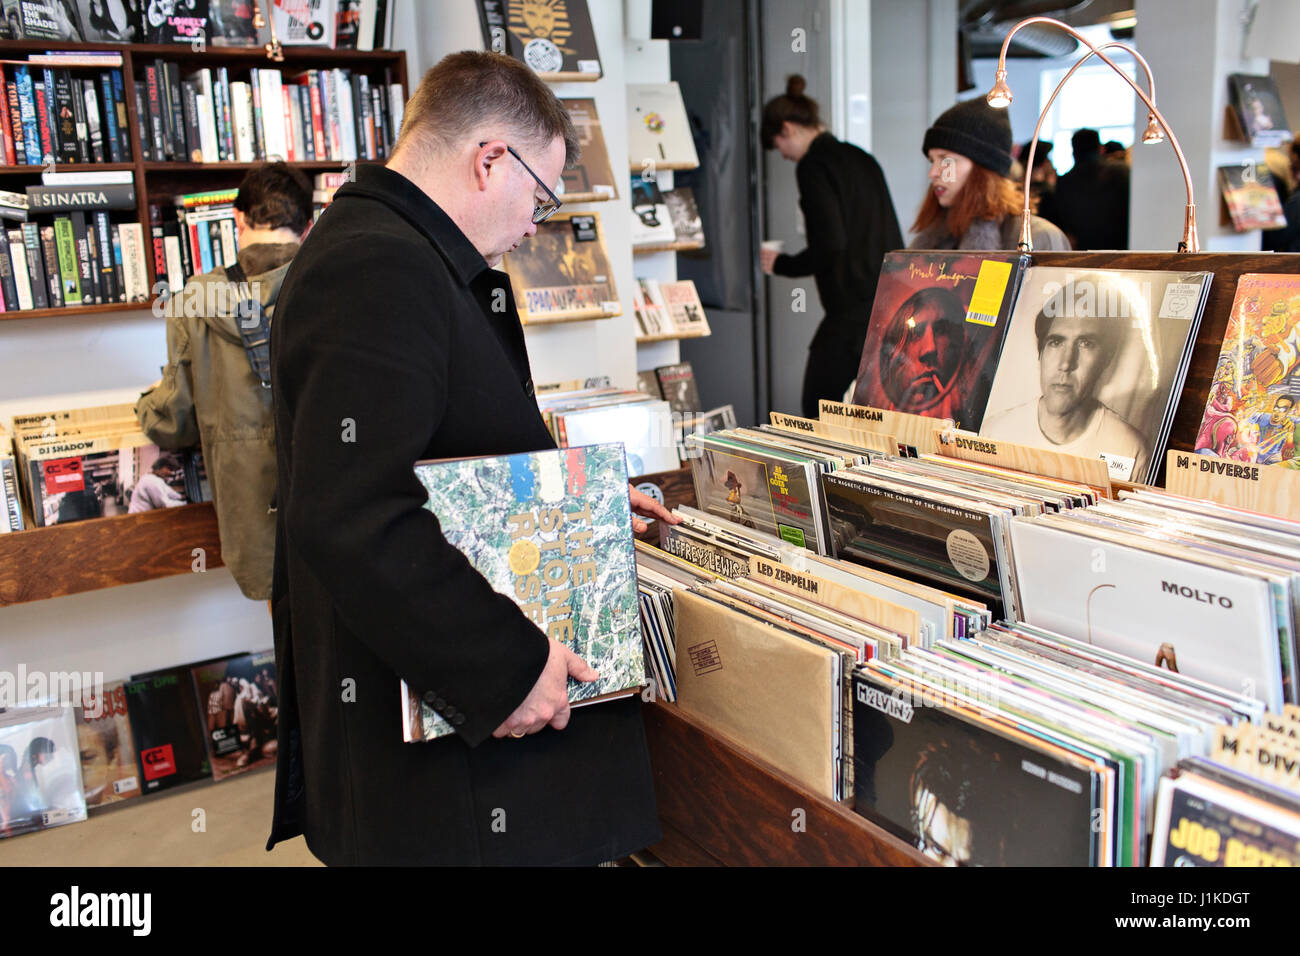 Denmark, Copenhagen, April 22nd. 2017. Vinyl collectors and music fans  attend Record Store Day 2017 in Copenhagen. Record Store Day, also known as  RSD, is an annual event to celebrate the culture